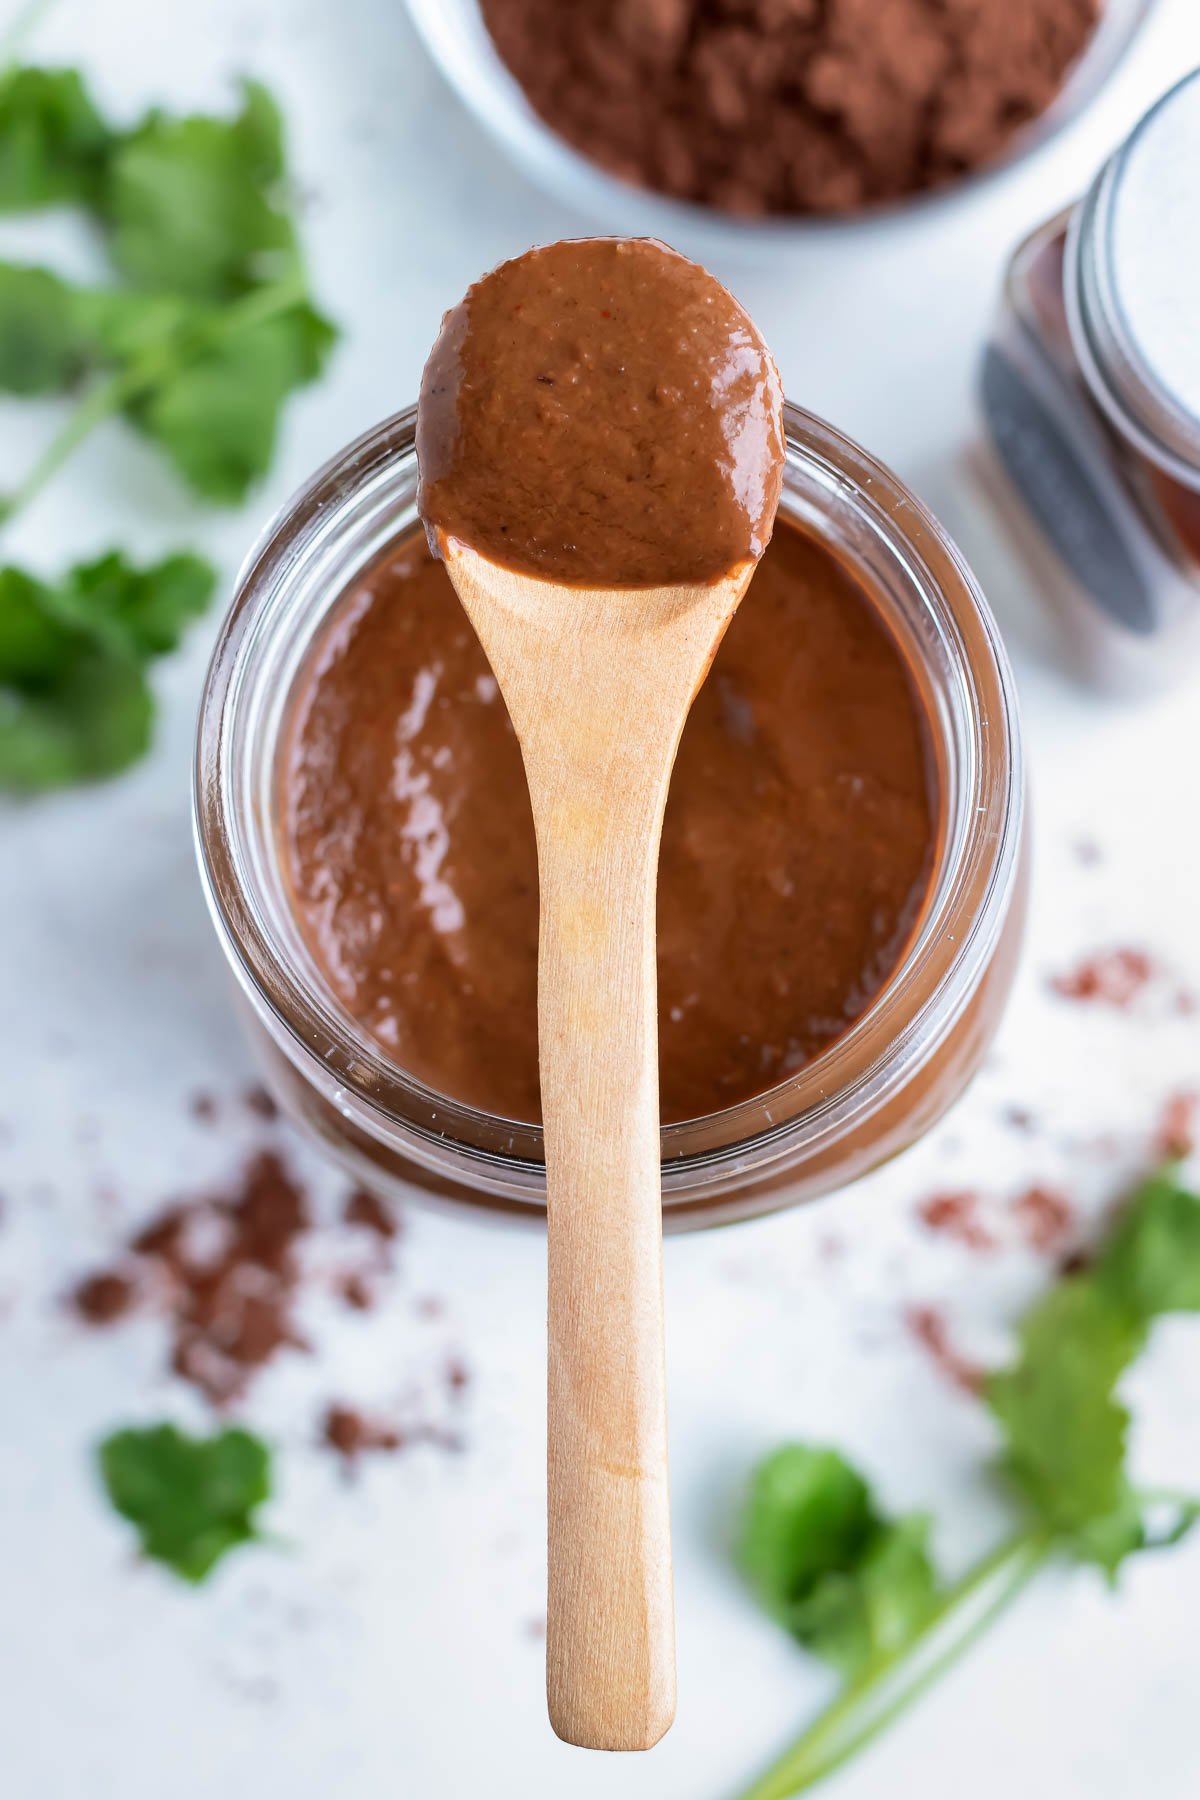 A spoon is used to serve mole sauce from a jar.